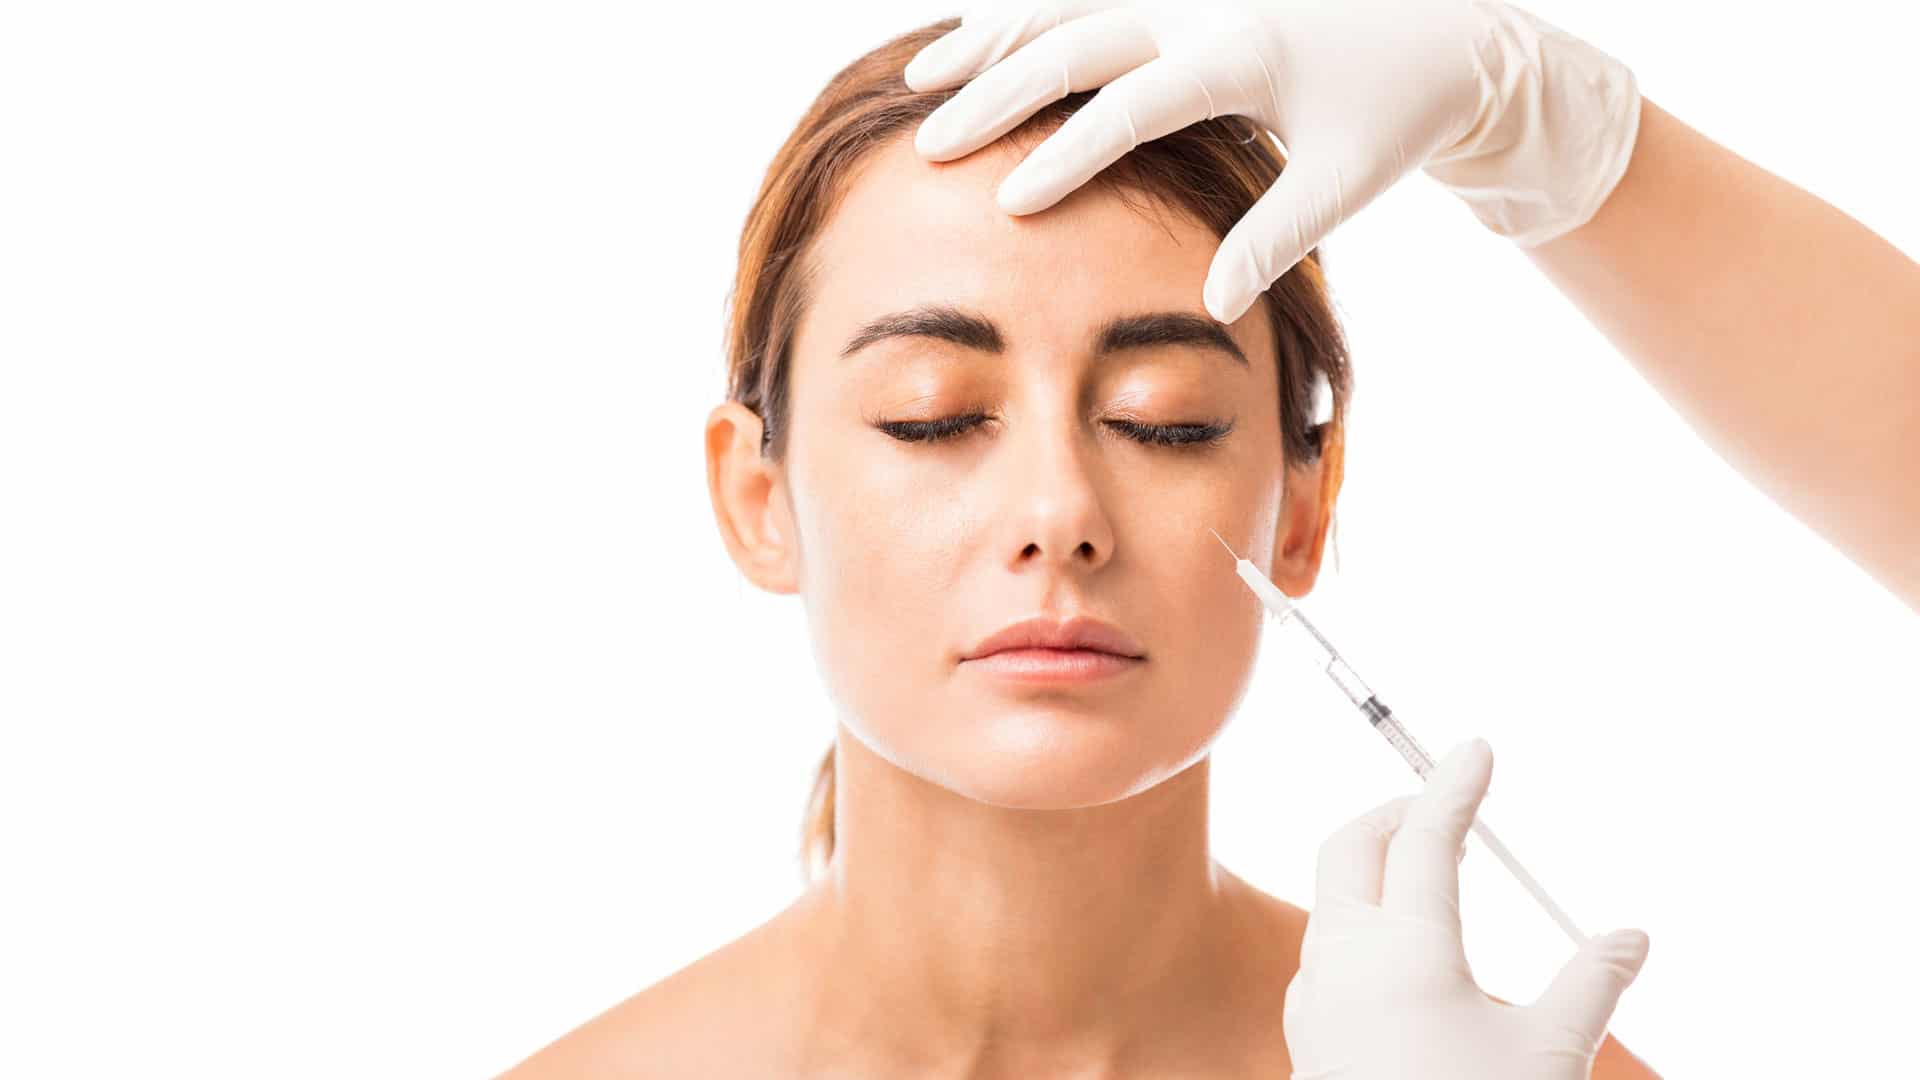 Myths that Have Reduced the Number of People Seeking Botox Treatment